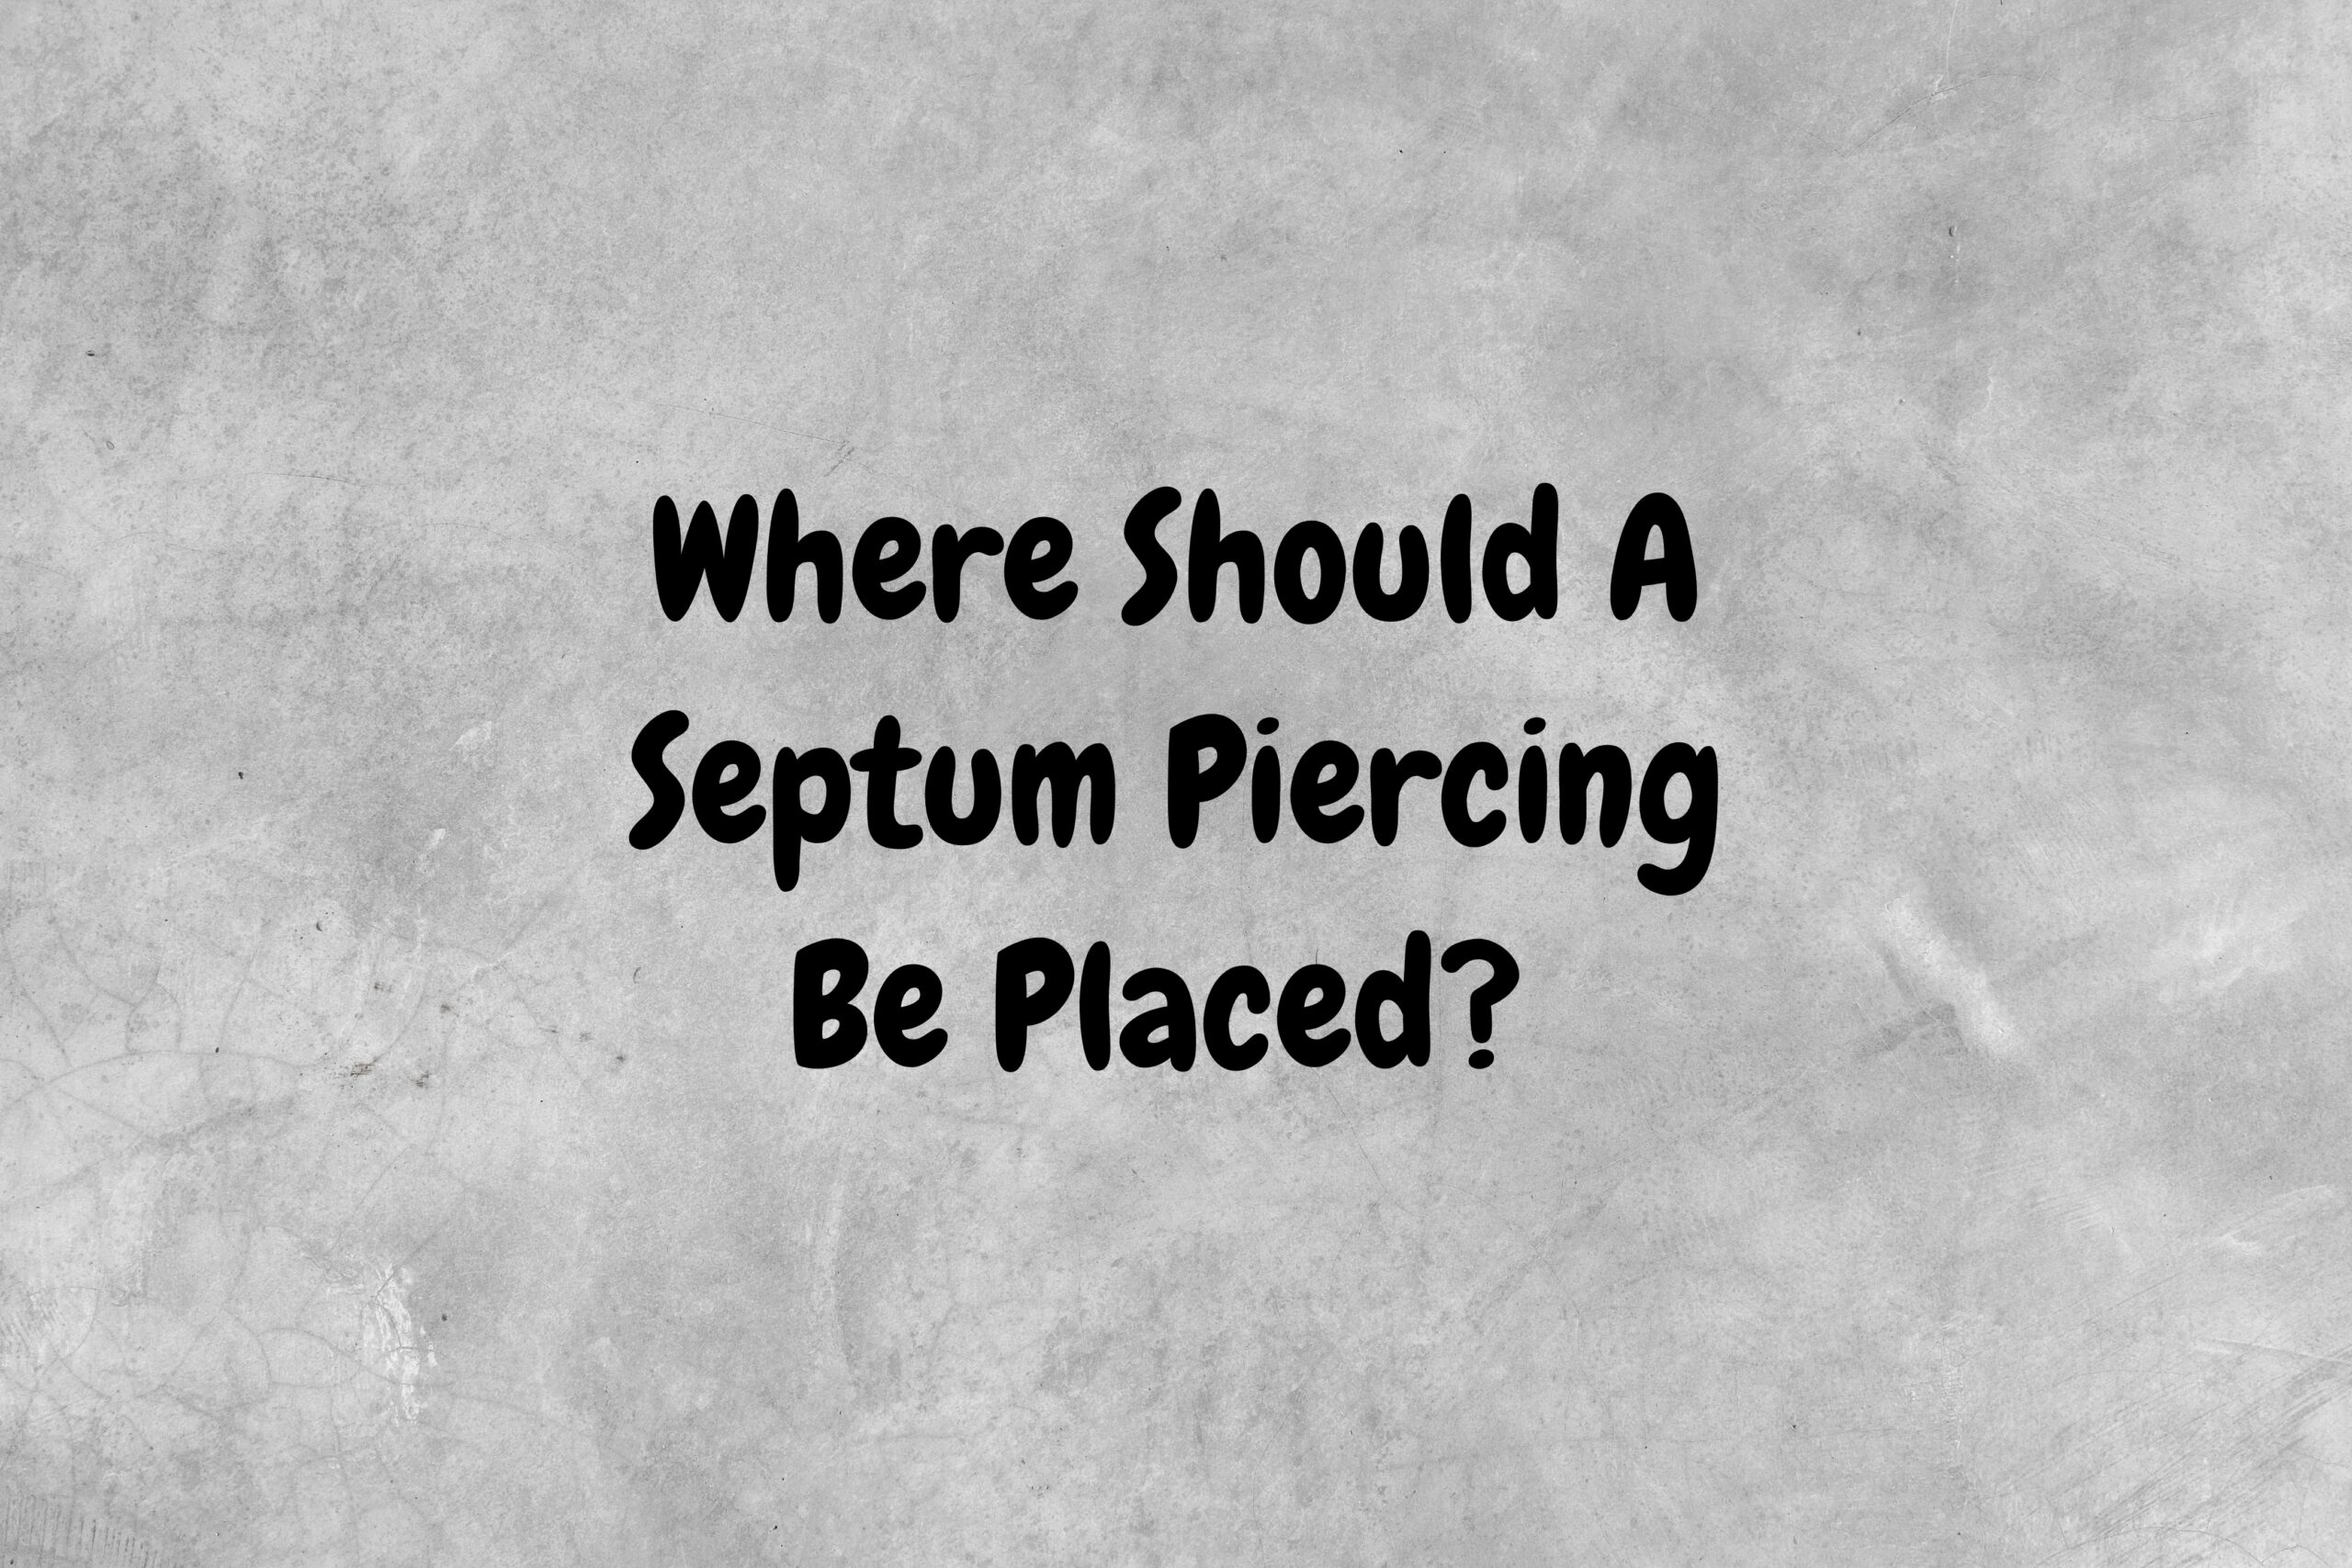 An image with a gray background and black text asking the question, "Where should a septum piercing be placed?"